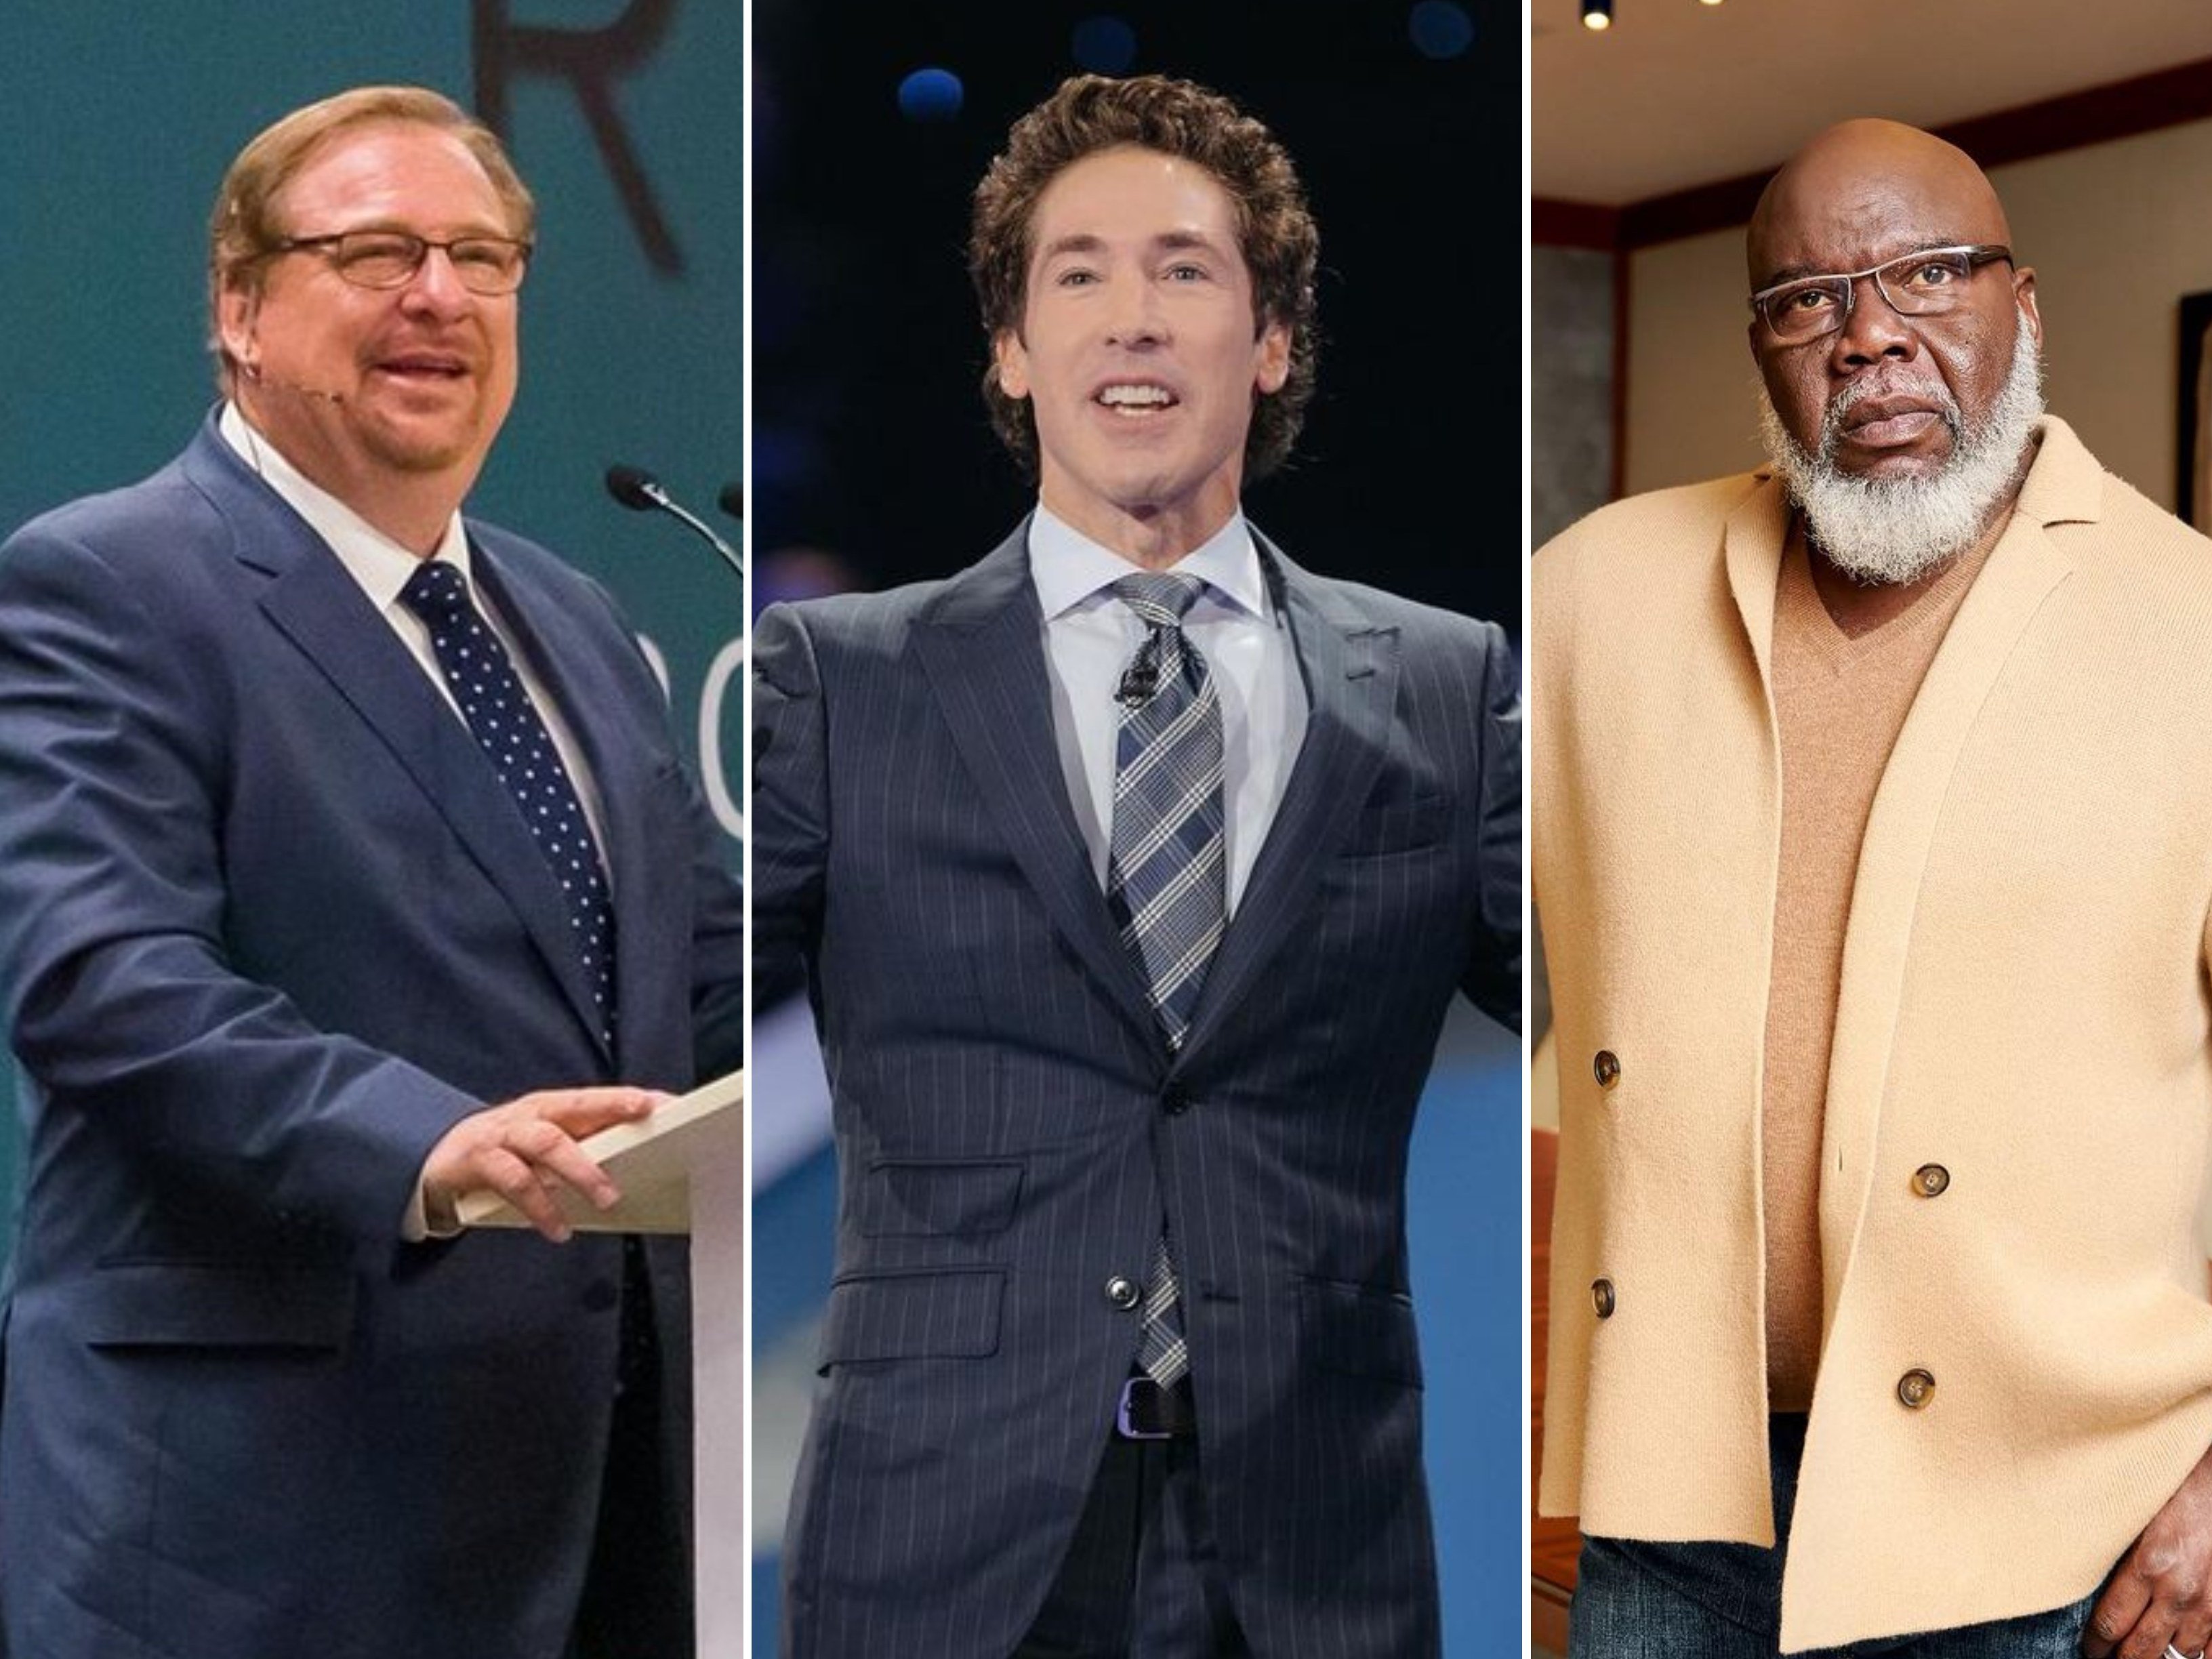 From Rick Warren and Joel Osteen to T.D. Jakes, these men of faith have sizeable fortunes, which they mostly don’t discuss. Photos: @lakewoodchurch, @bishopjakes, @pastorrickwarren/Instagram